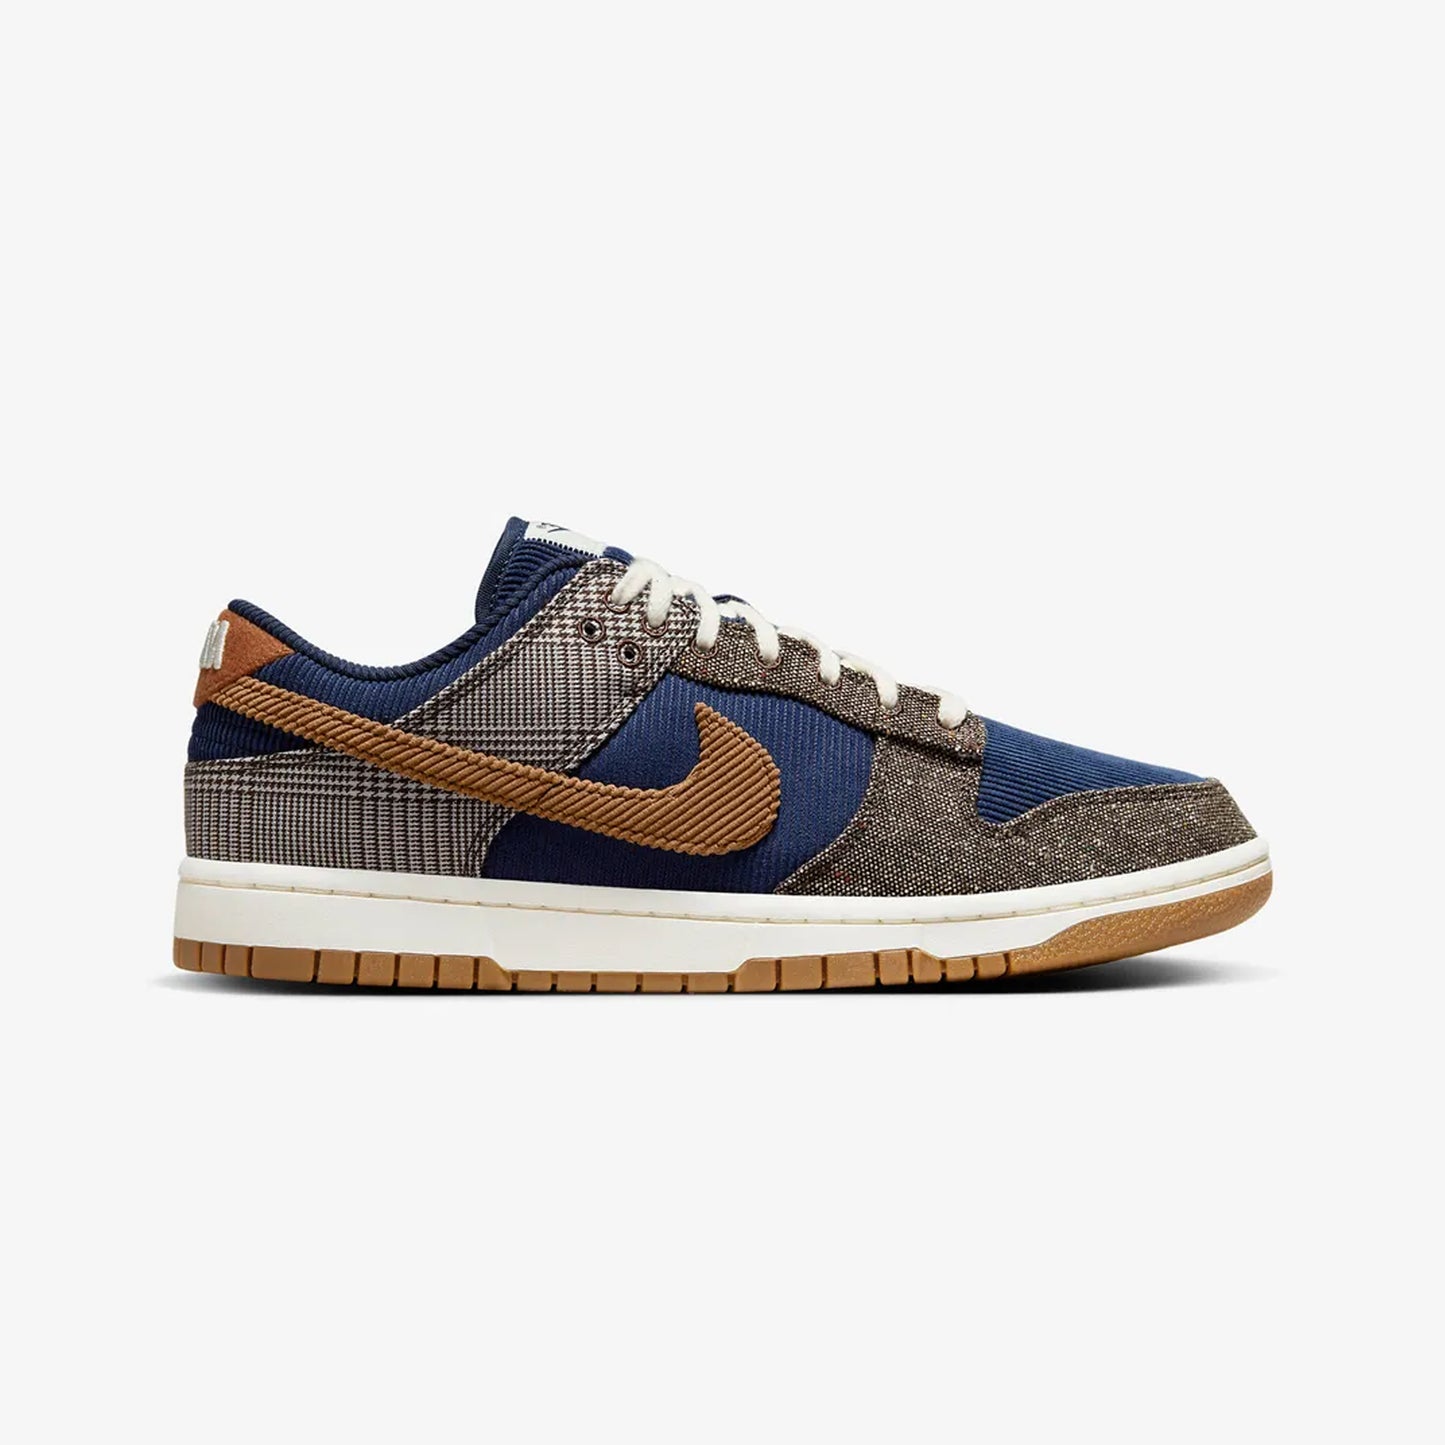 DUNK LOW PREMIUM 'MIDNIGHT NAVY/ALE BROWN-PALE IVORY'